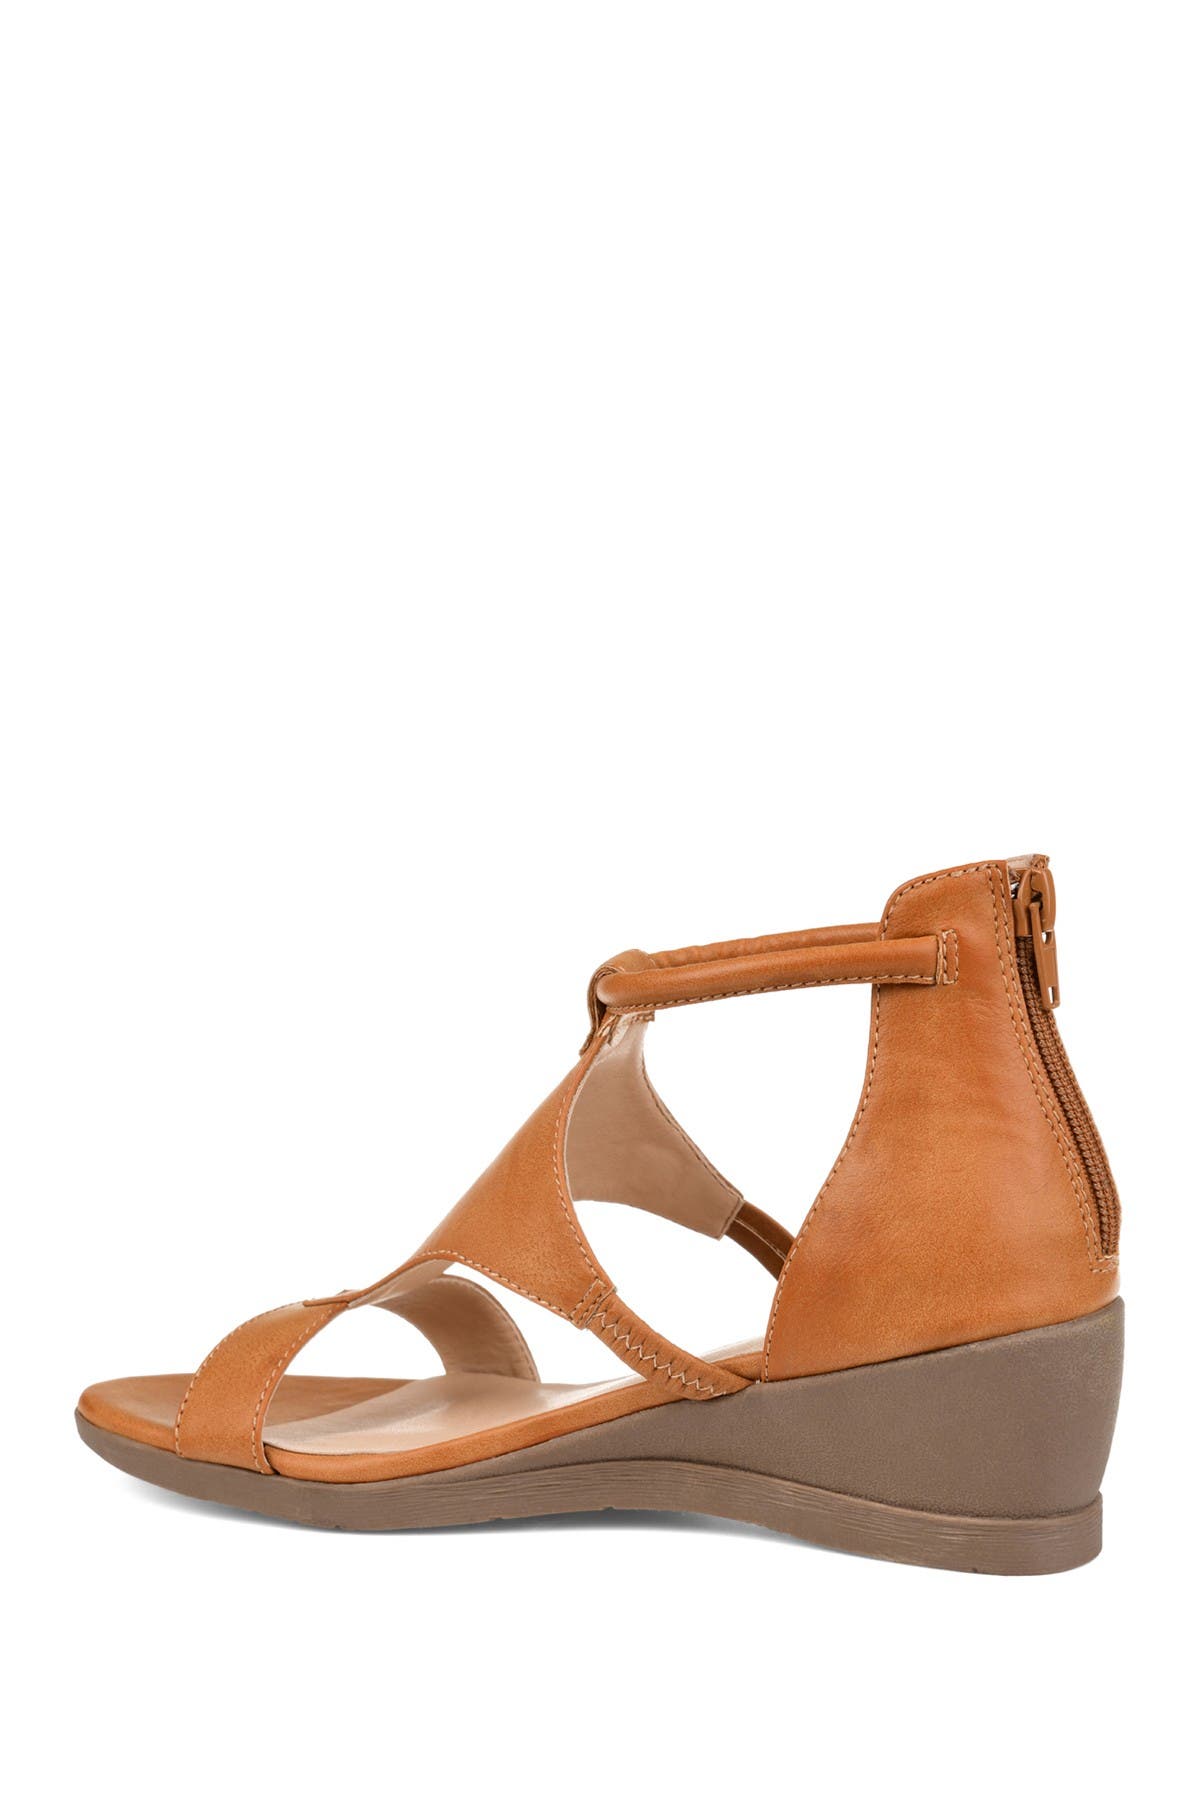 Journee Collection Trayle Wedge Sandal In Medium Brown5